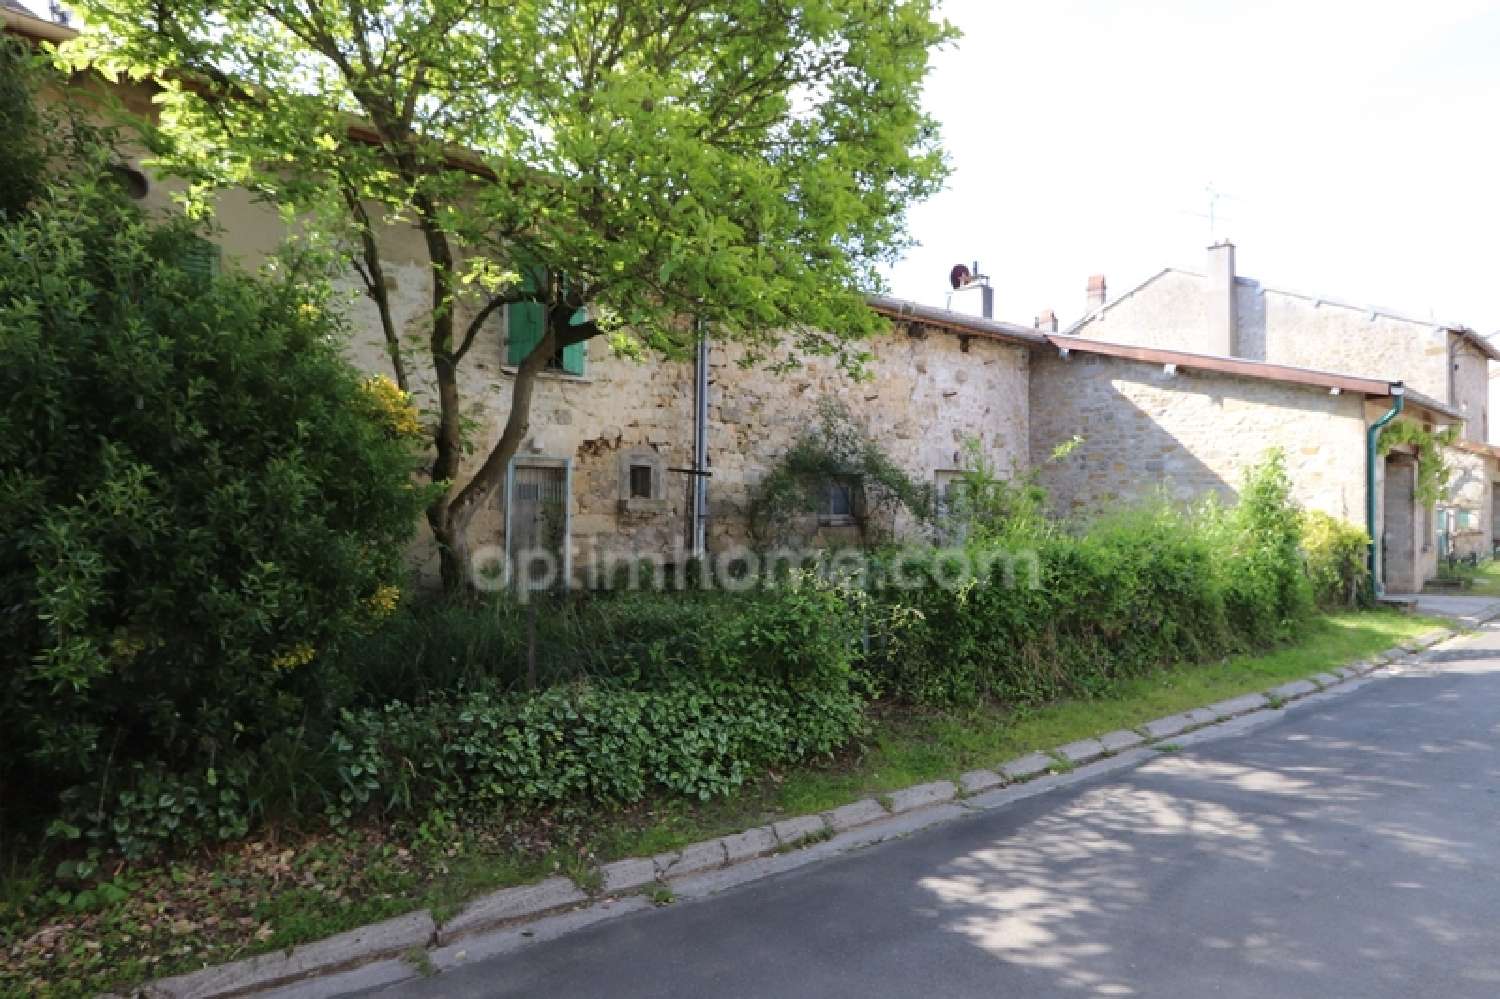  for sale house Murvaux Meuse 4